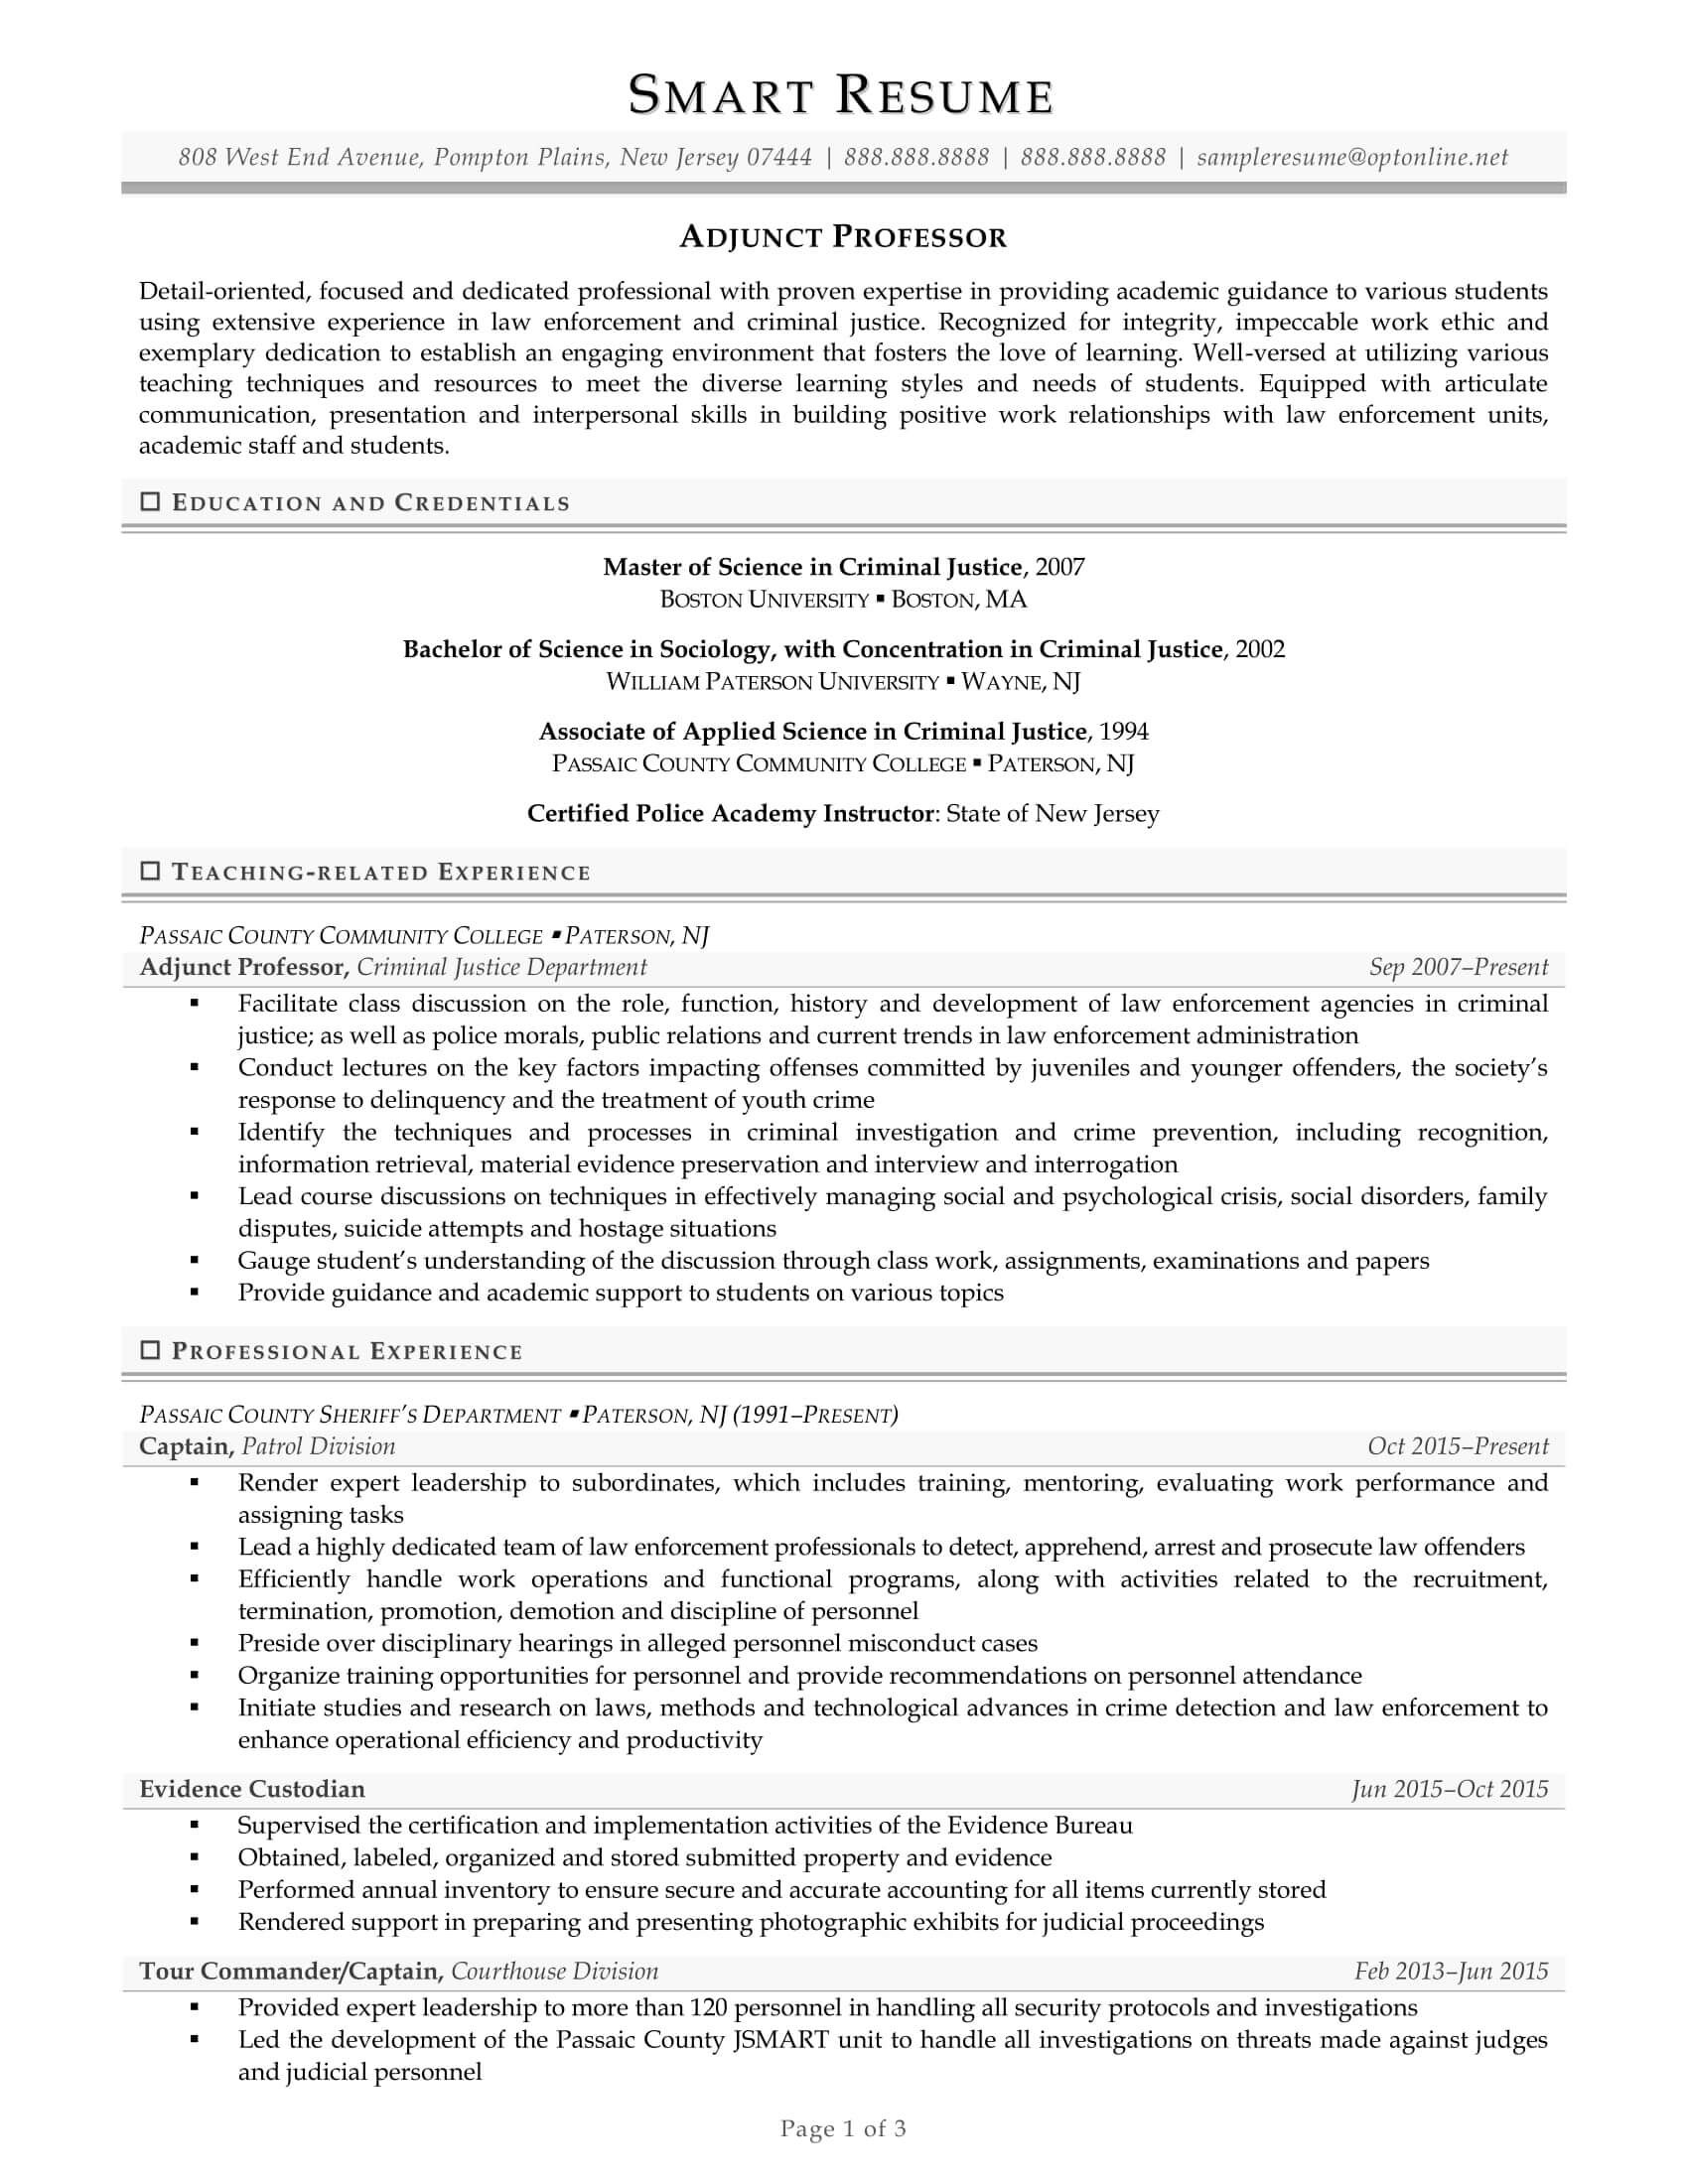 Sample Resume for College Instructor Position Resume Examples Smart Resume Services